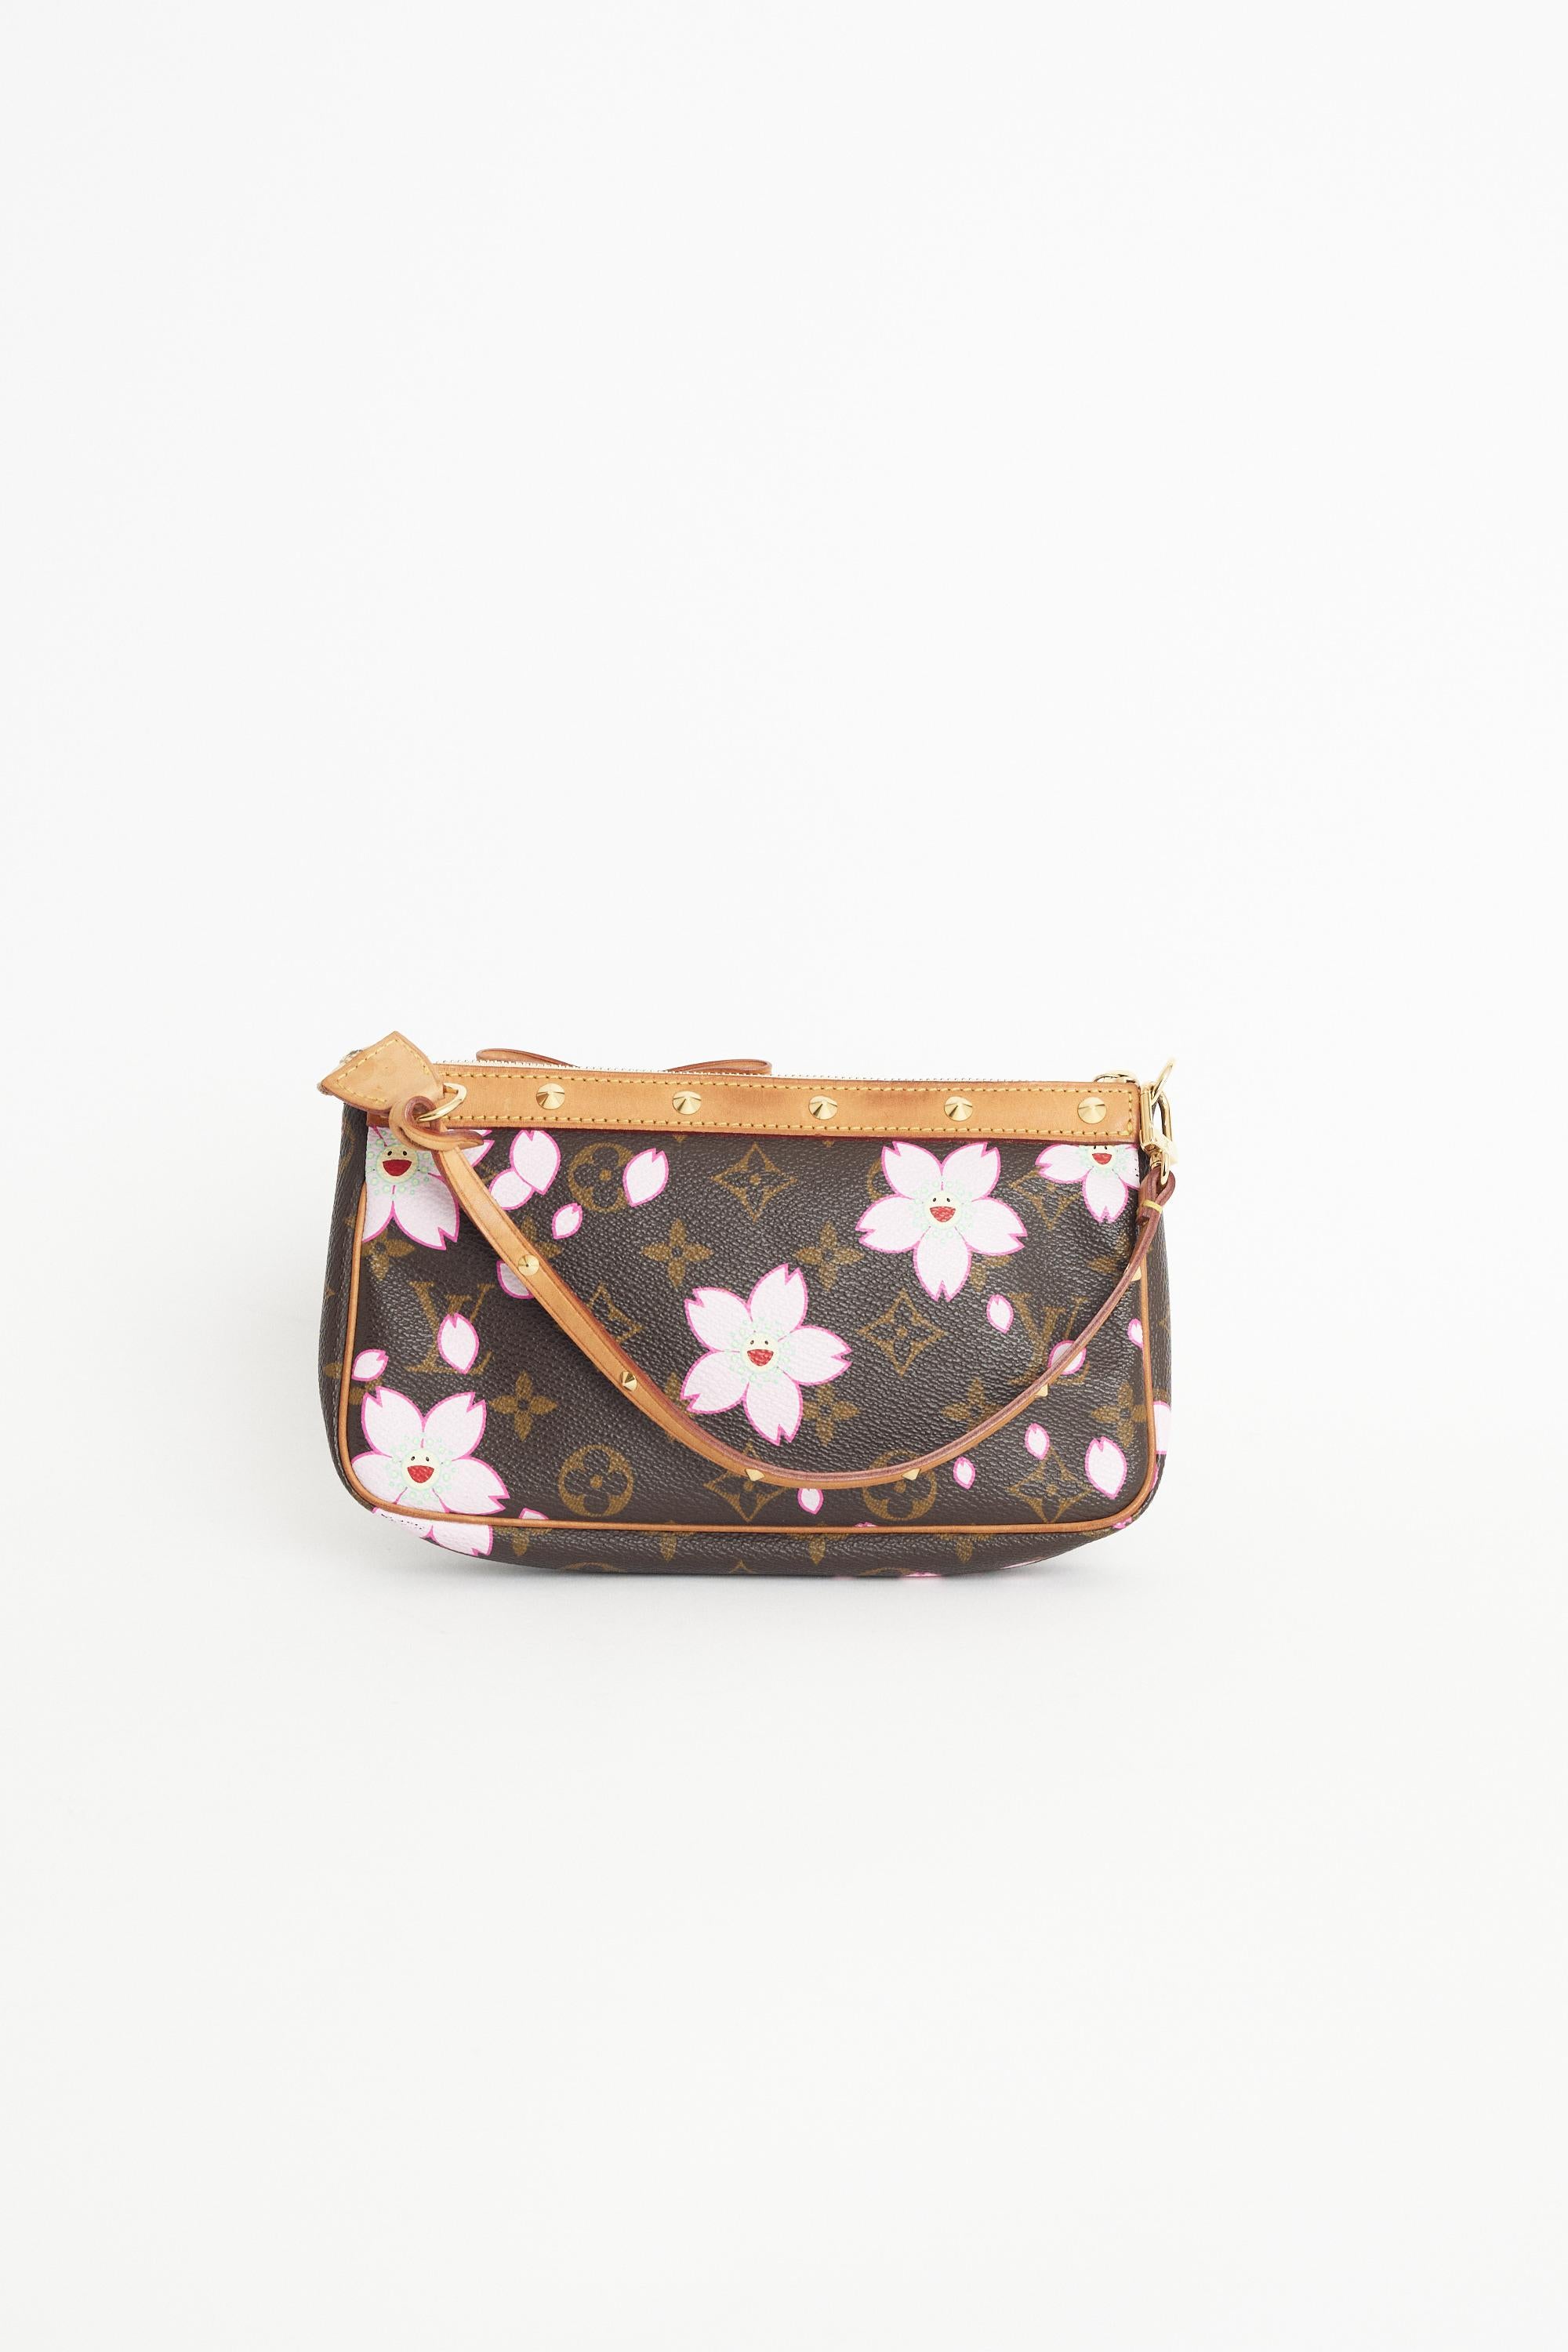 We are excited to present this Louis Vuitton x Takashi Murakami 2005 Cherry Blossom pochette bag. Features monogram print, zip closure and studded strap. Pre-loved, in excellent condition. Authenticity guaranteed.

Fabric: Leather
Dustbag: